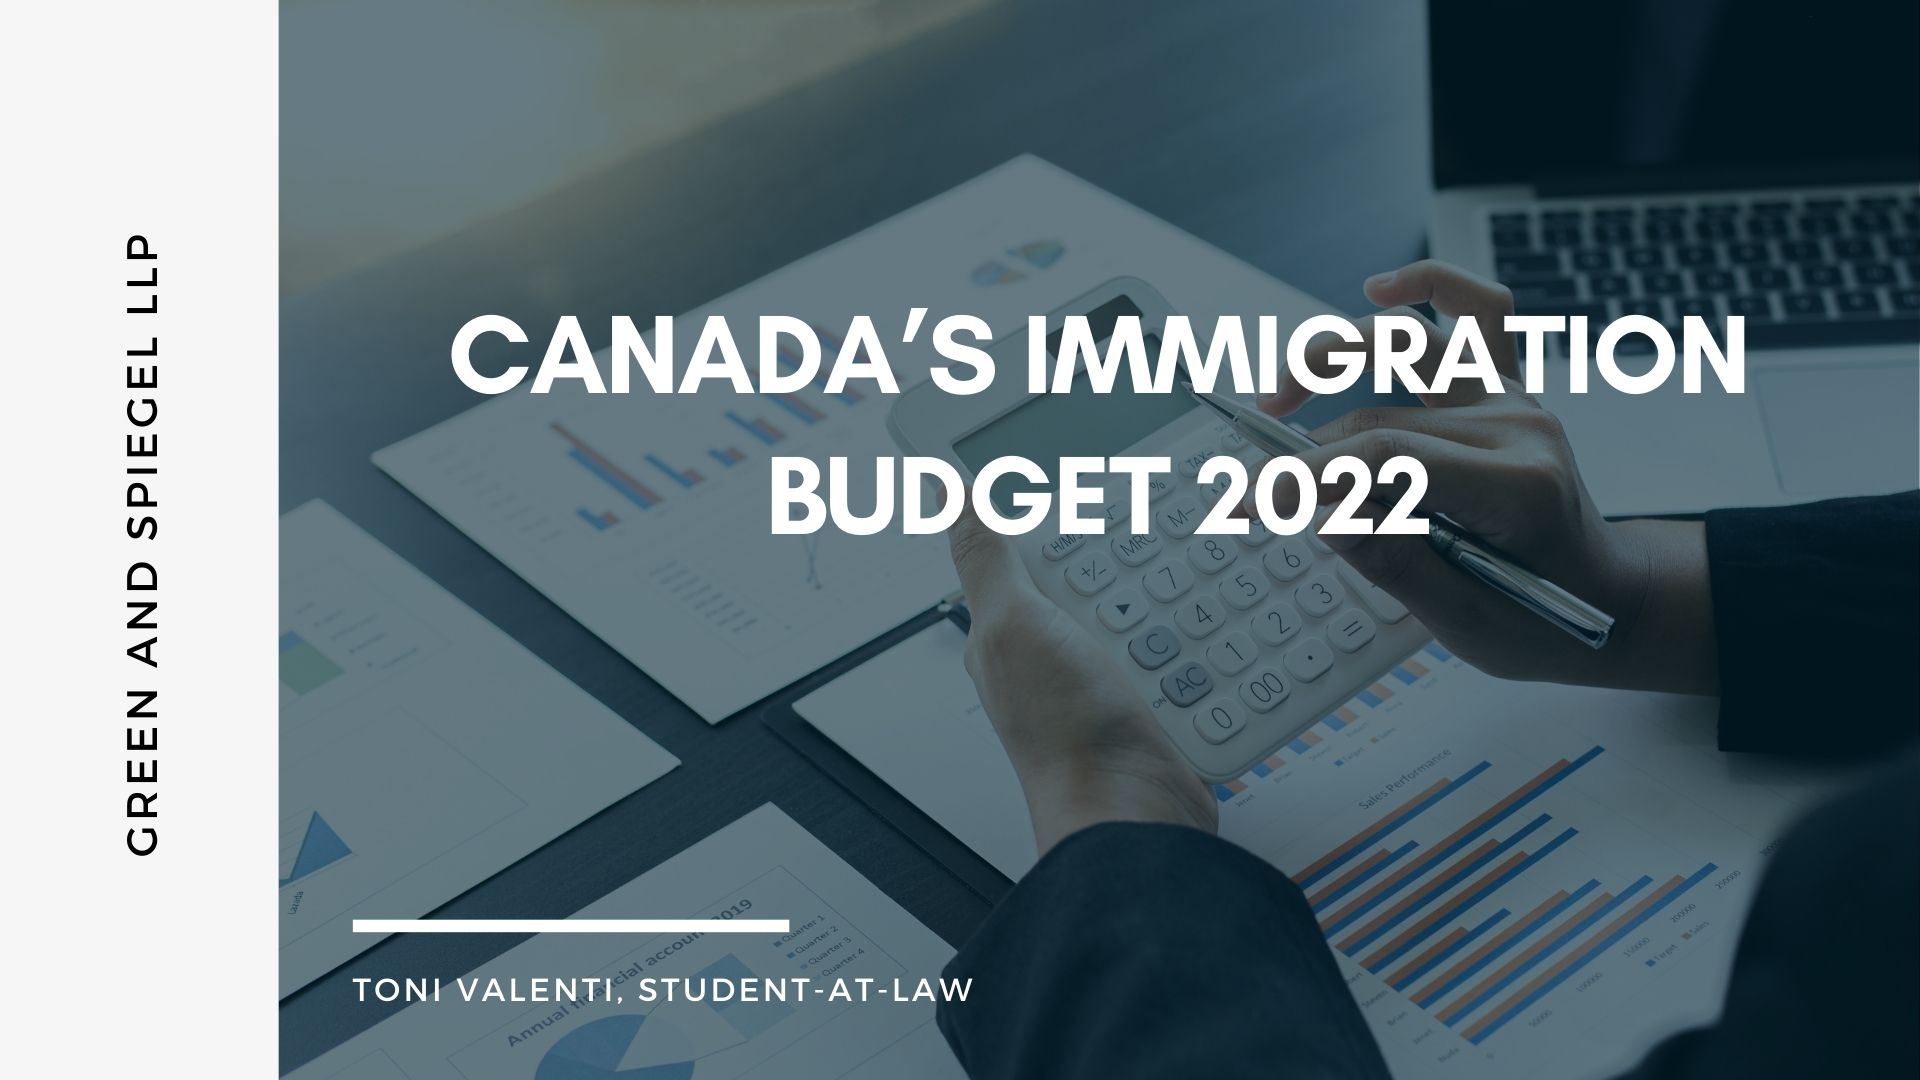 Canada’s Immigration Budget 2022